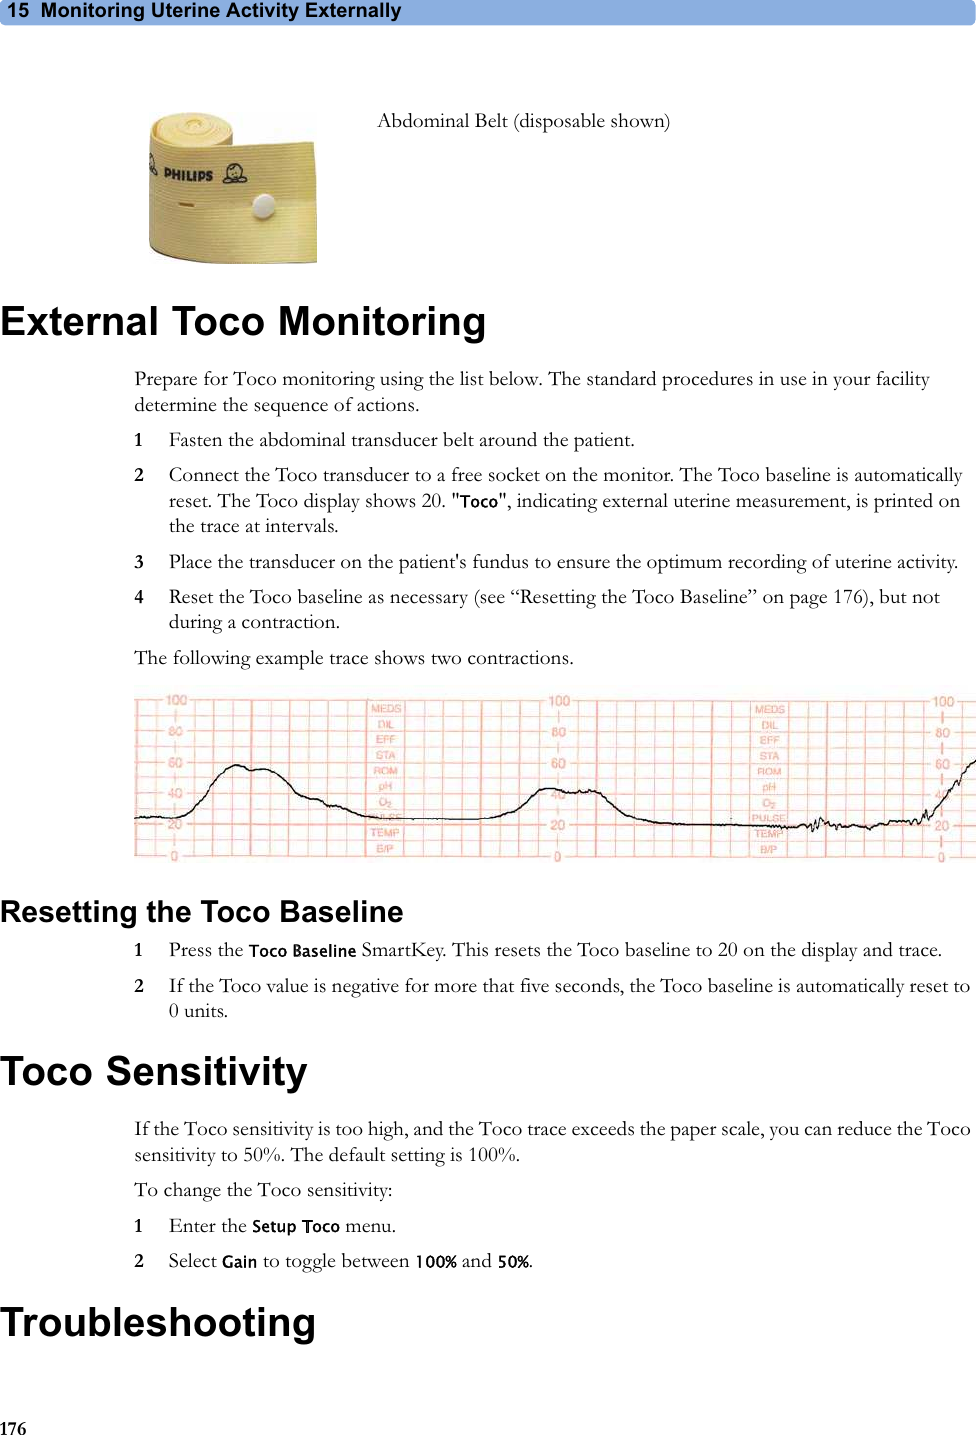 15  Monitoring Uterine Activity Externally176External Toco MonitoringPrepare for Toco monitoring using the list below. The standard procedures in use in your facility determine the sequence of actions.1Fasten the abdominal transducer belt around the patient.2Connect the Toco transducer to a free socket on the monitor. The Toco baseline is automatically reset. The Toco display shows 20. &quot;Toco&quot;, indicating external uterine measurement, is printed on the trace at intervals.3Place the transducer on the patient&apos;s fundus to ensure the optimum recording of uterine activity.4Reset the Toco baseline as necessary (see “Resetting the Toco Baseline” on page 176), but not during a contraction.The following example trace shows two contractions.Resetting the Toco Baseline1Press the Toco Baseline SmartKey. This resets the Toco baseline to 20 on the display and trace.2If the Toco value is negative for more that five seconds, the Toco baseline is automatically reset to 0 units.Toco SensitivityIf the Toco sensitivity is too high, and the Toco trace exceeds the paper scale, you can reduce the Toco sensitivity to 50%. The default setting is 100%.To change the Toco sensitivity:1Enter the Setup Toco menu.2Select Gain to toggle between 100% and 50%.TroubleshootingAbdominal Belt (disposable shown)